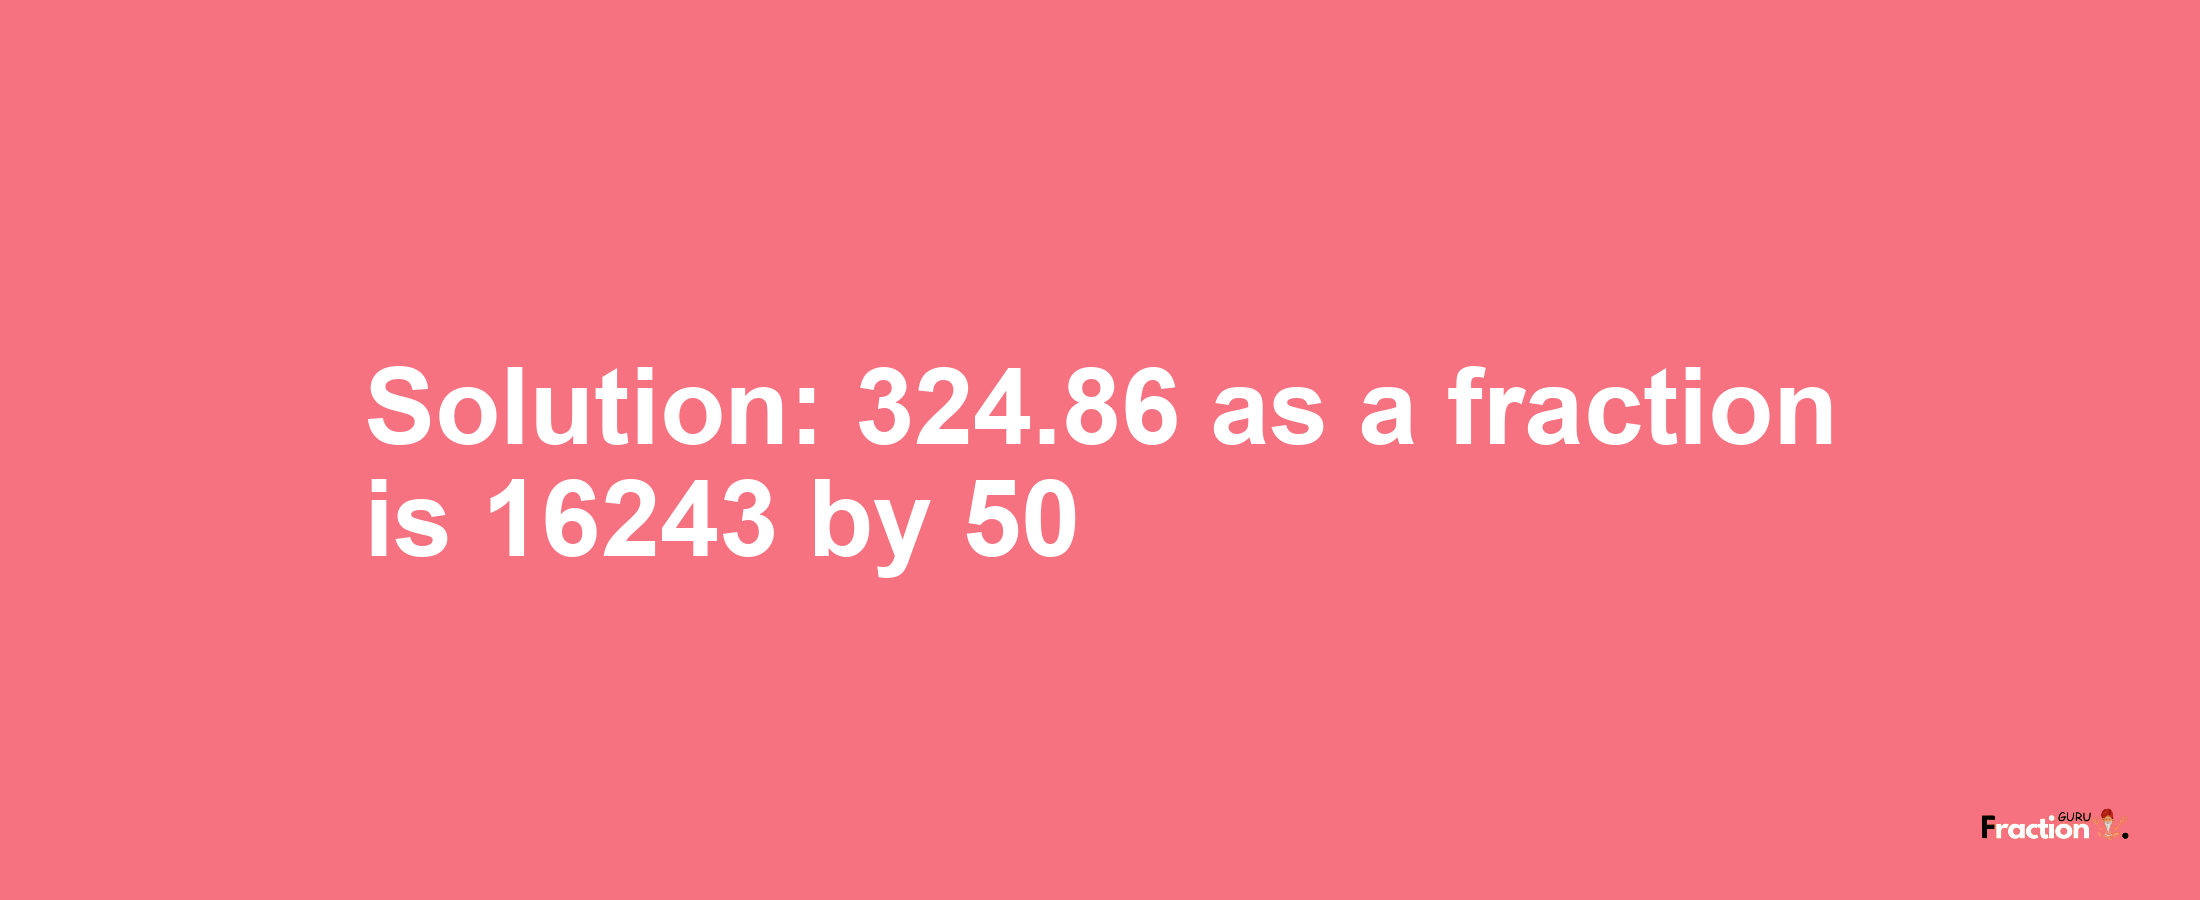 Solution:324.86 as a fraction is 16243/50